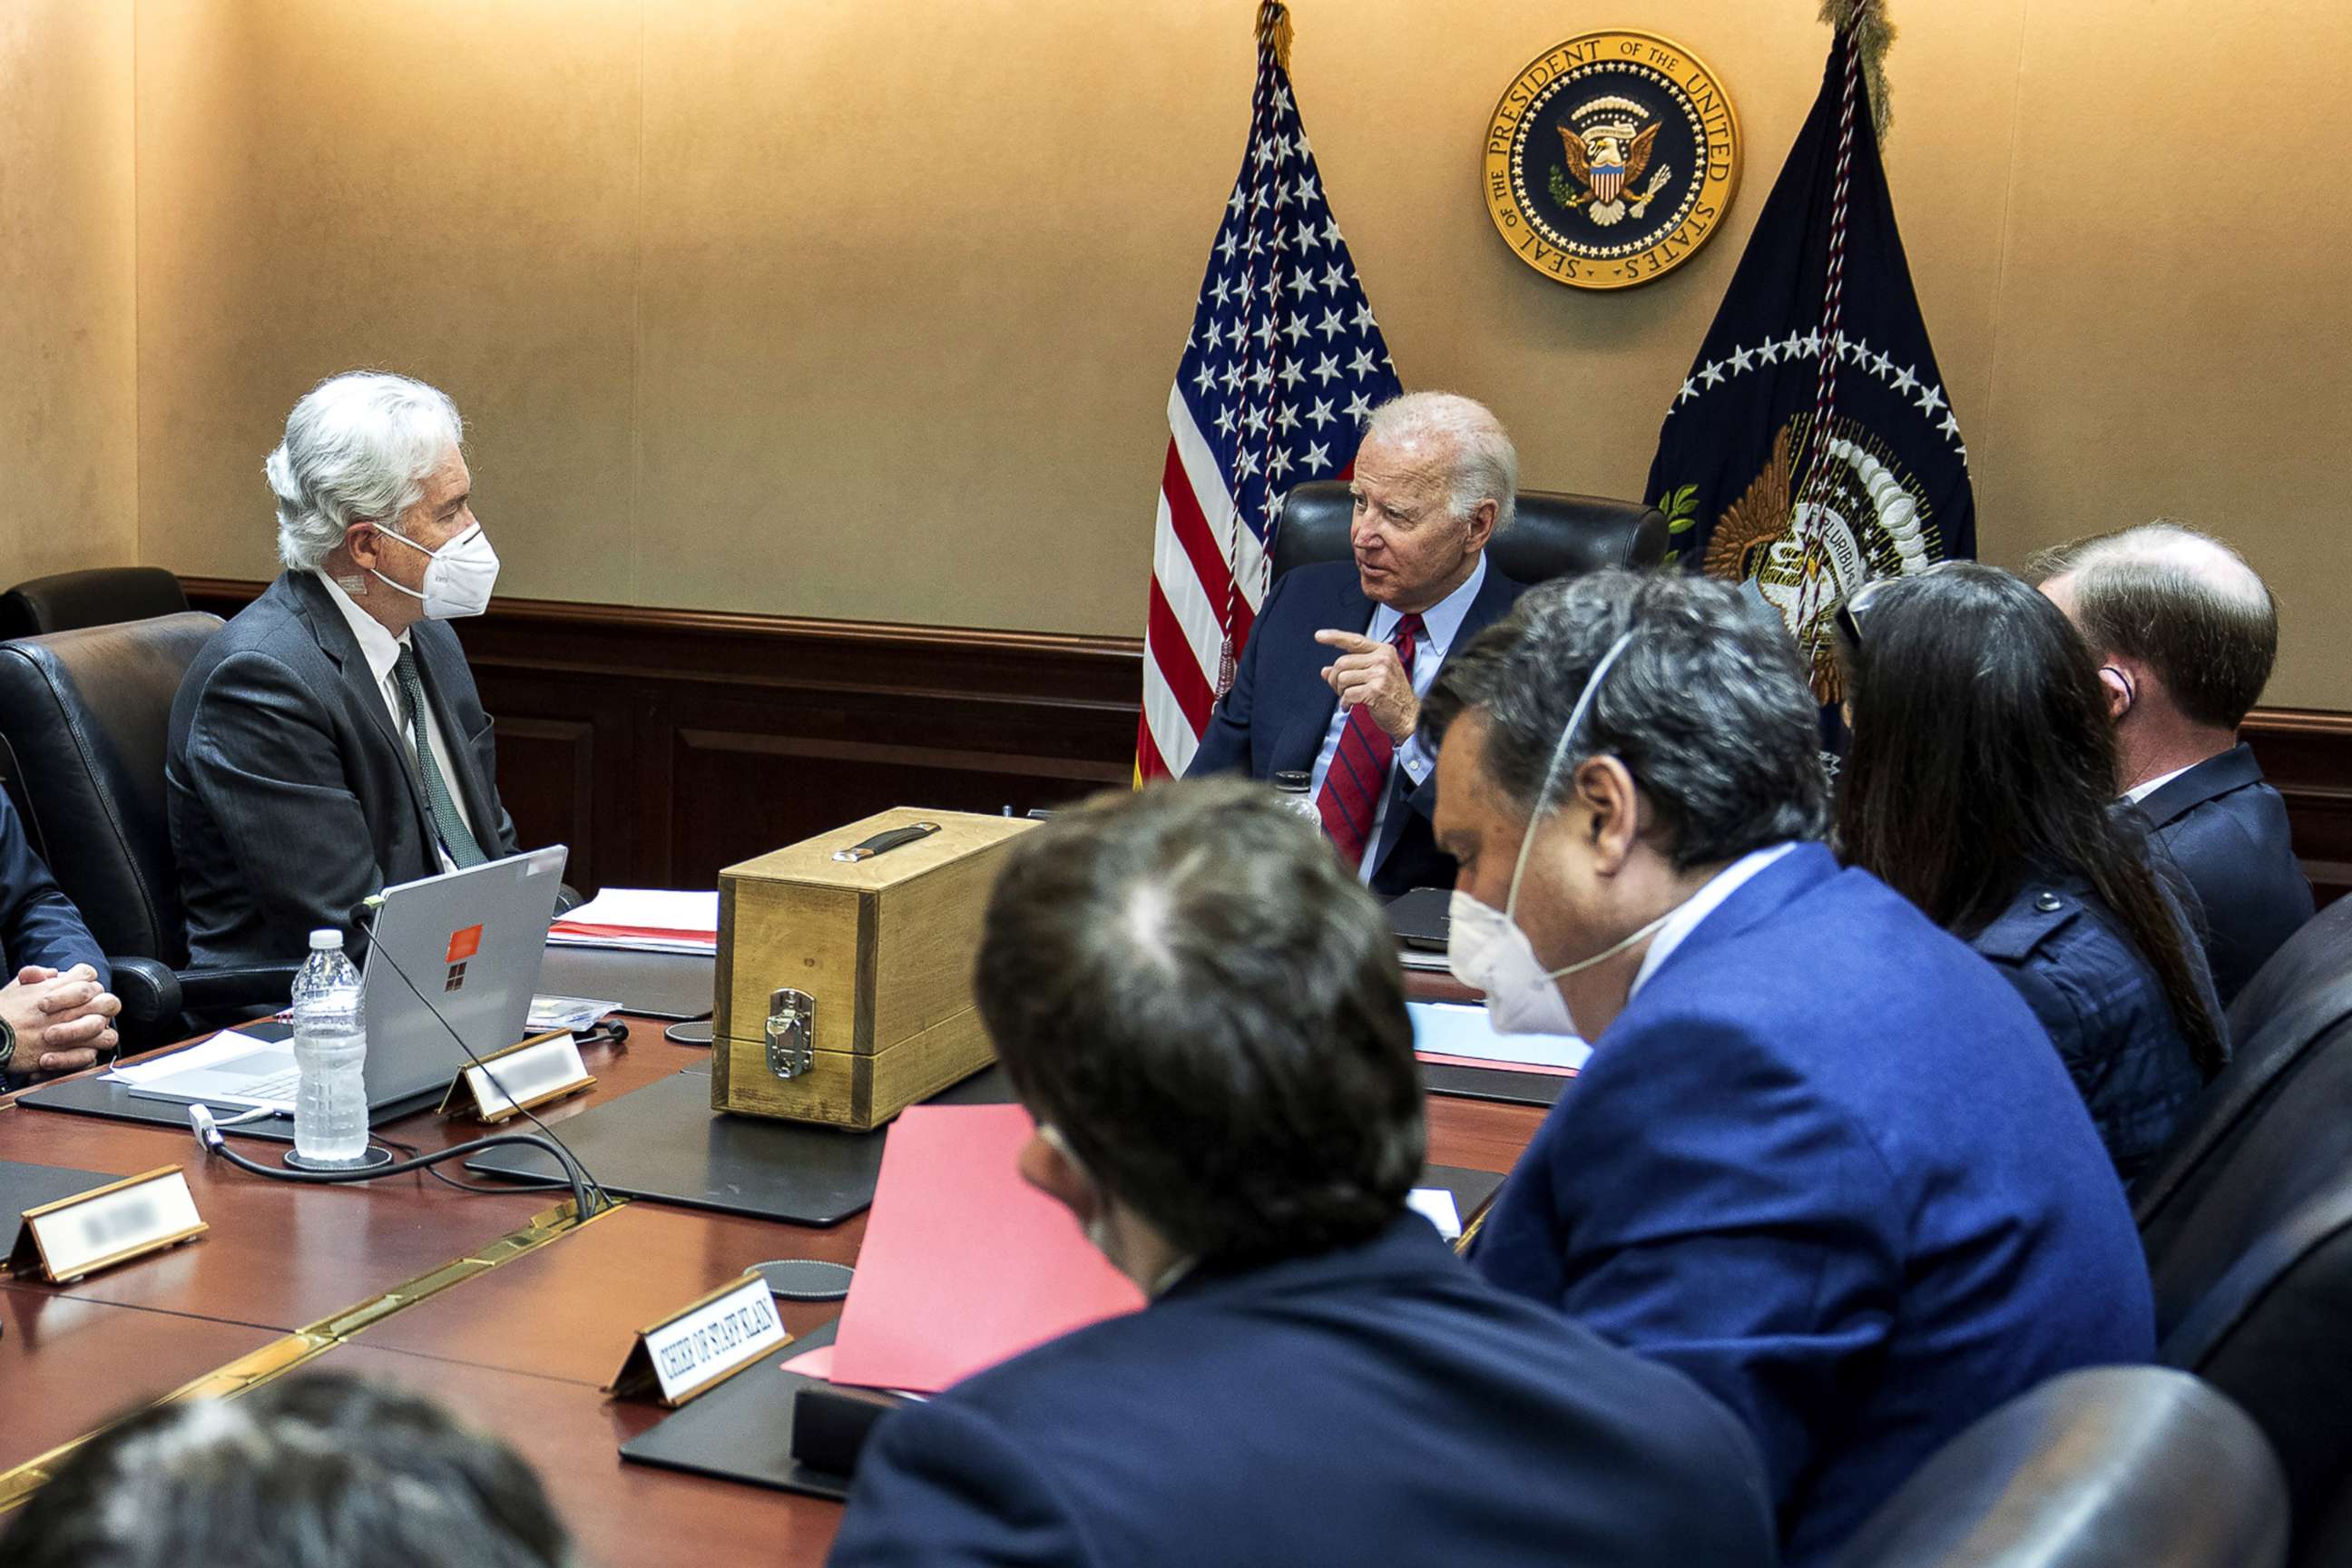 PHOTO: MPresident Joe Biden meets with members of the CIA and National Security advisers about al-Qaeda leaders and their locations, July 1, 2022, in the White House Situation Room.